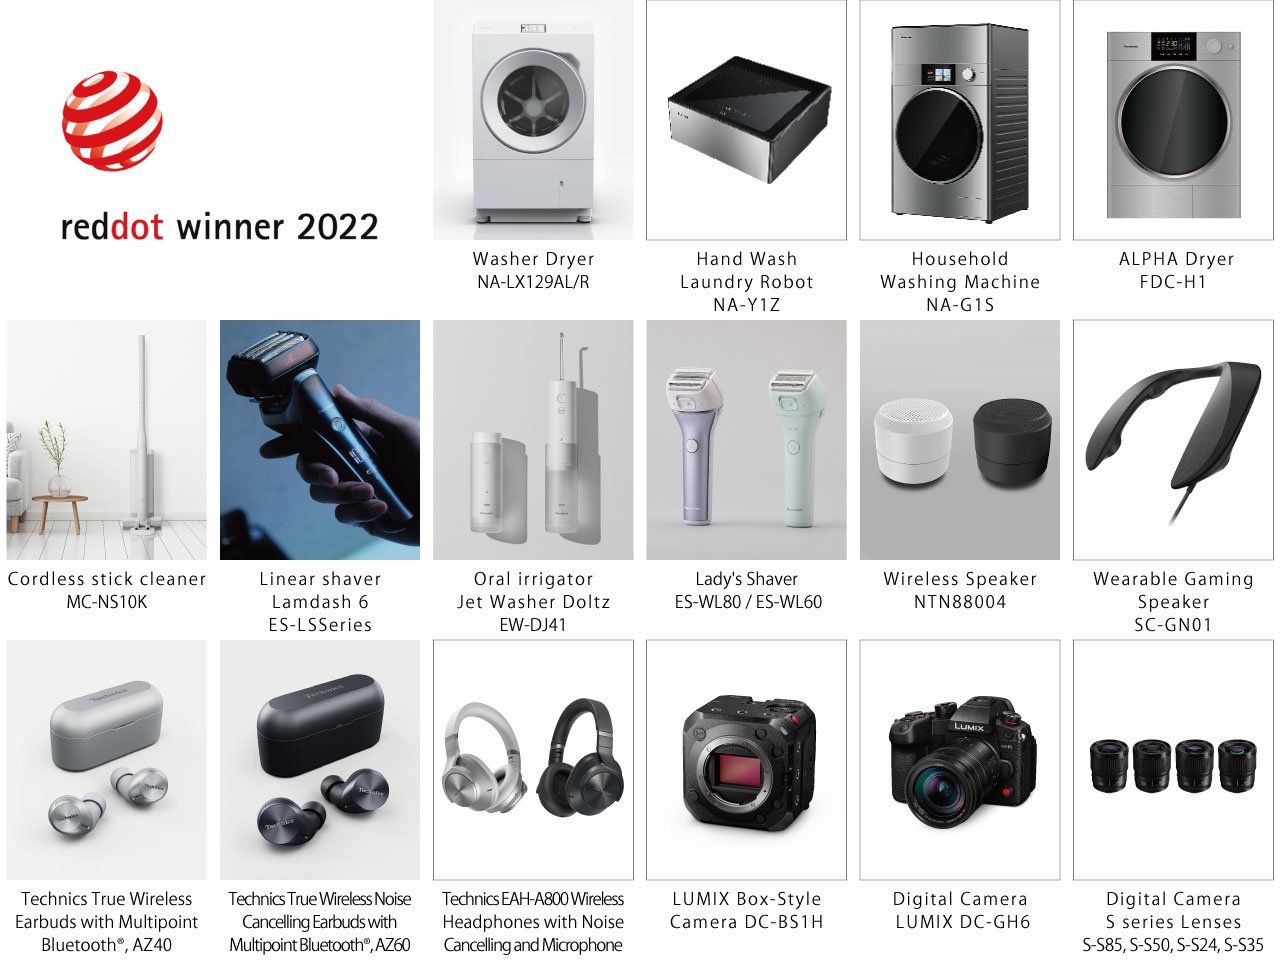 Sixteen Panasonic products that won the Red Dot Award 2022: Product Design